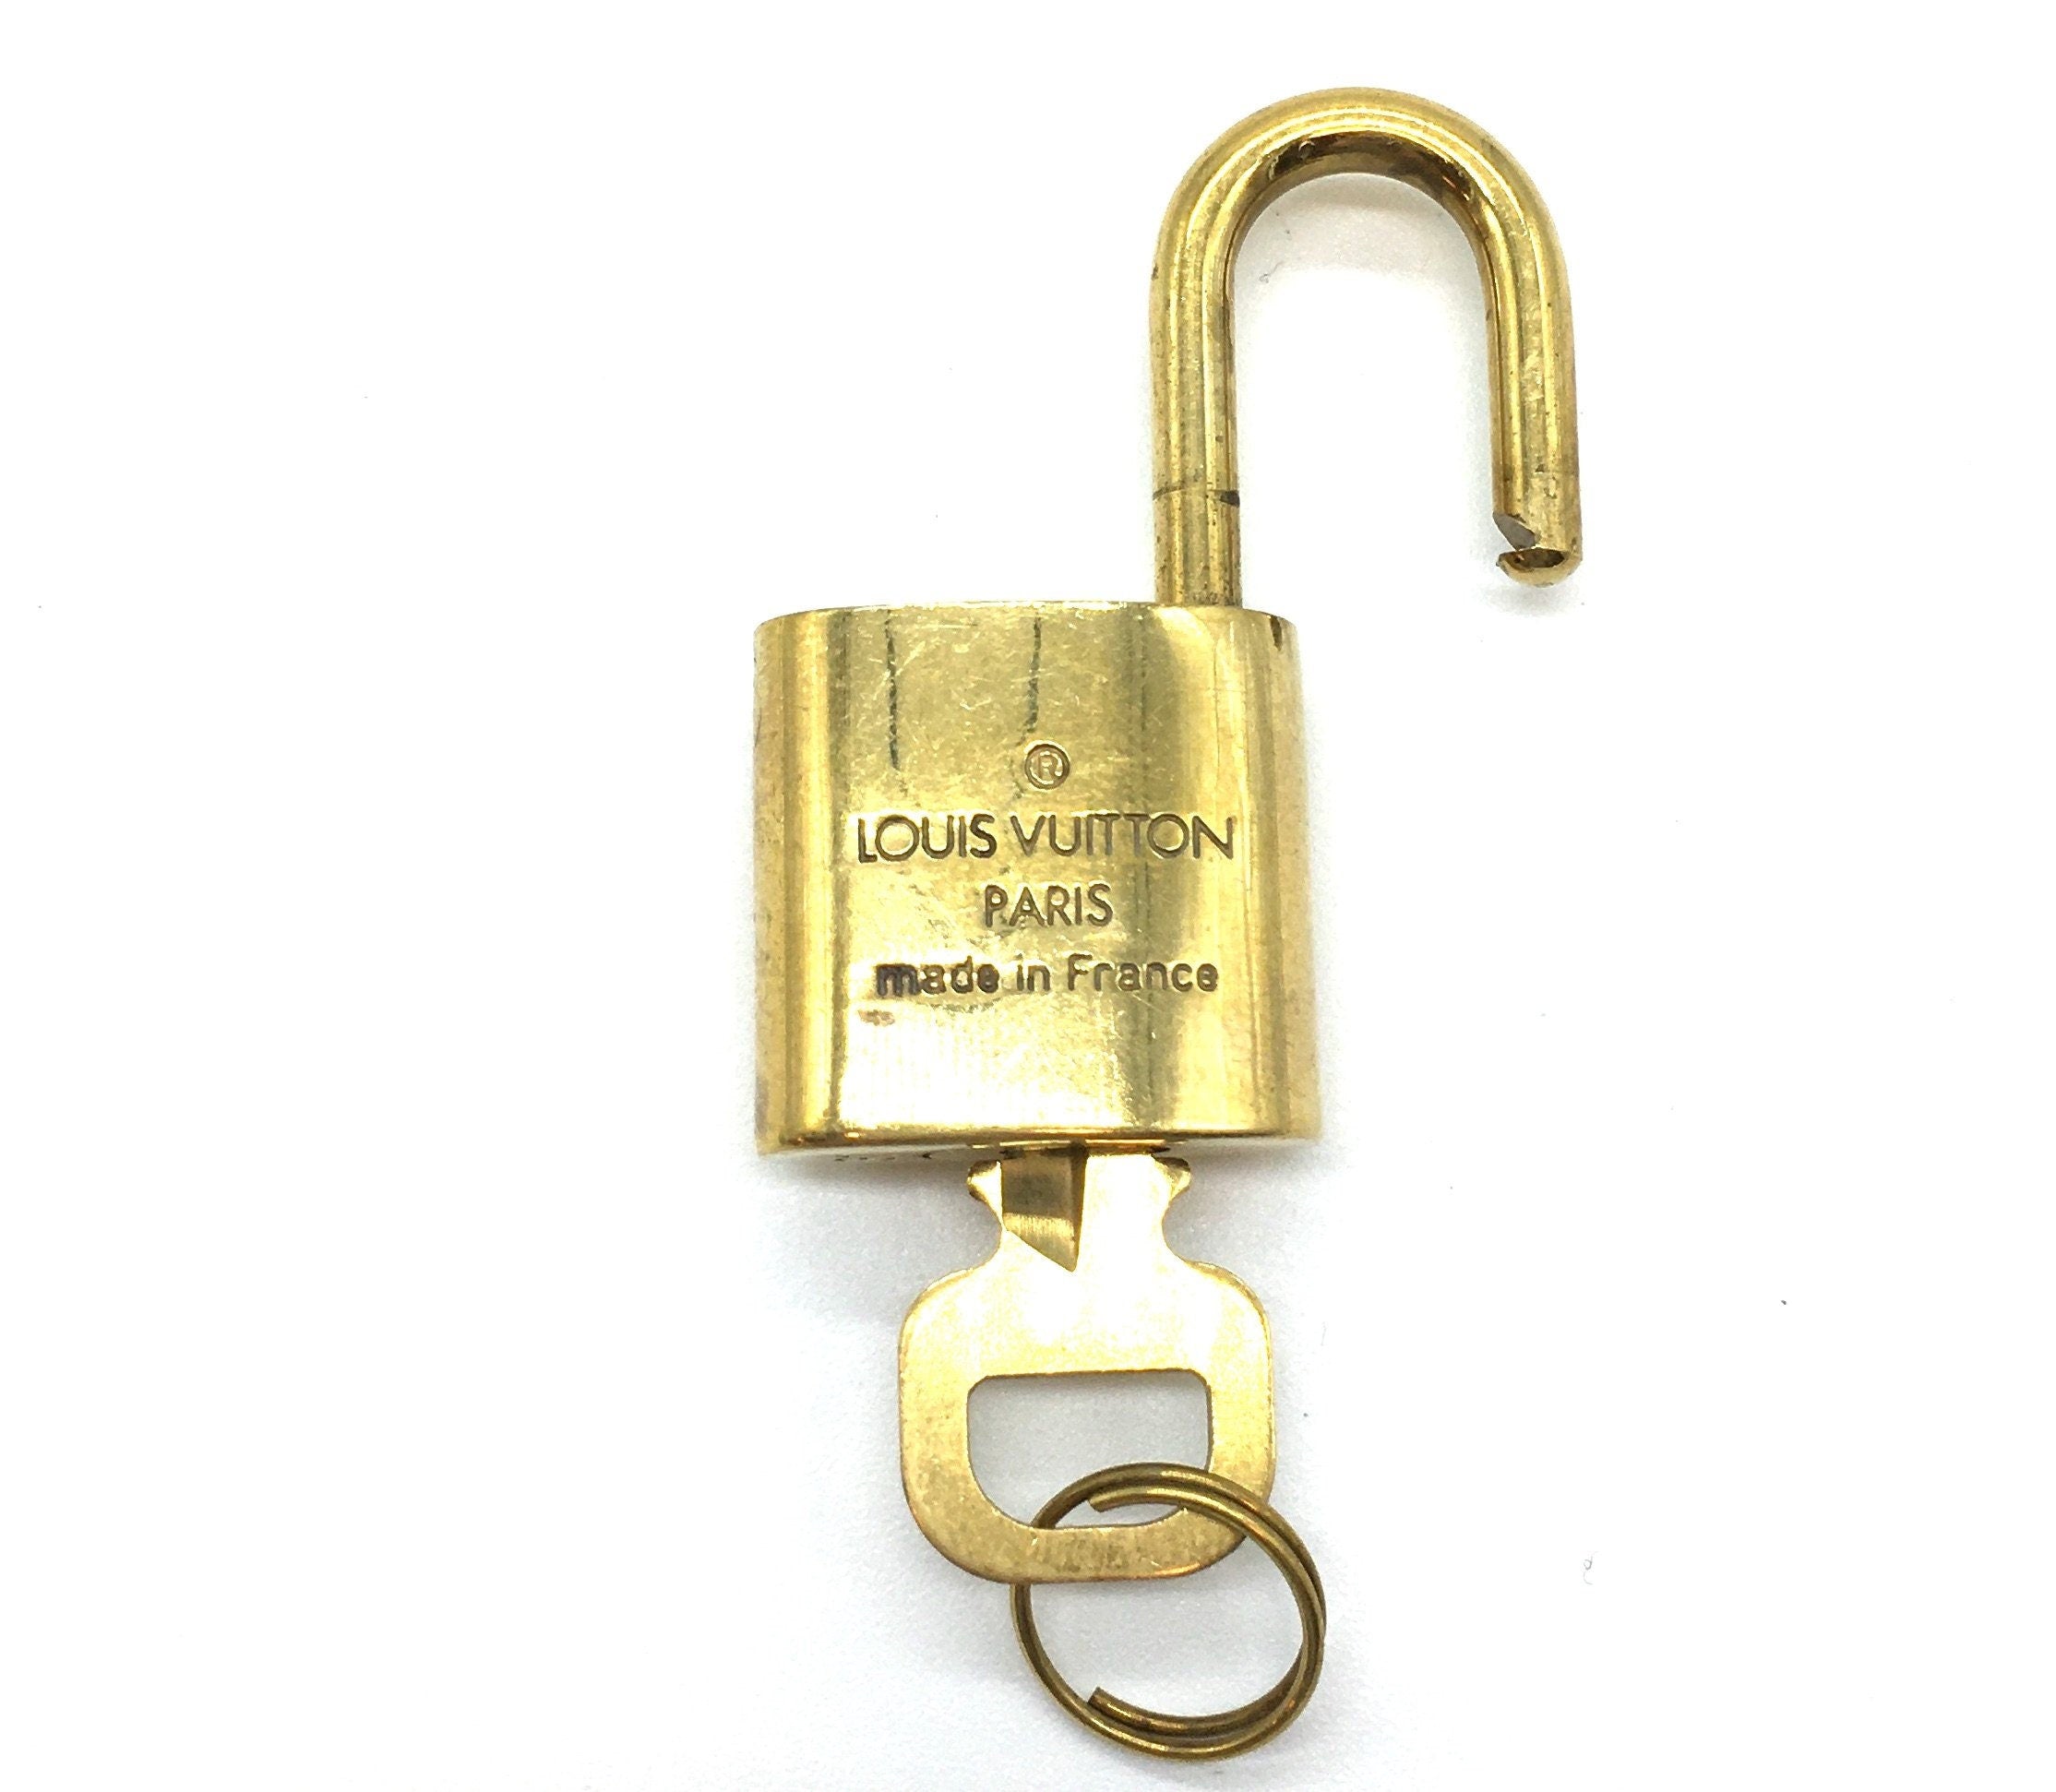 Vintage Gold Brass Lock and Key Set #316 by Louis Vuitton